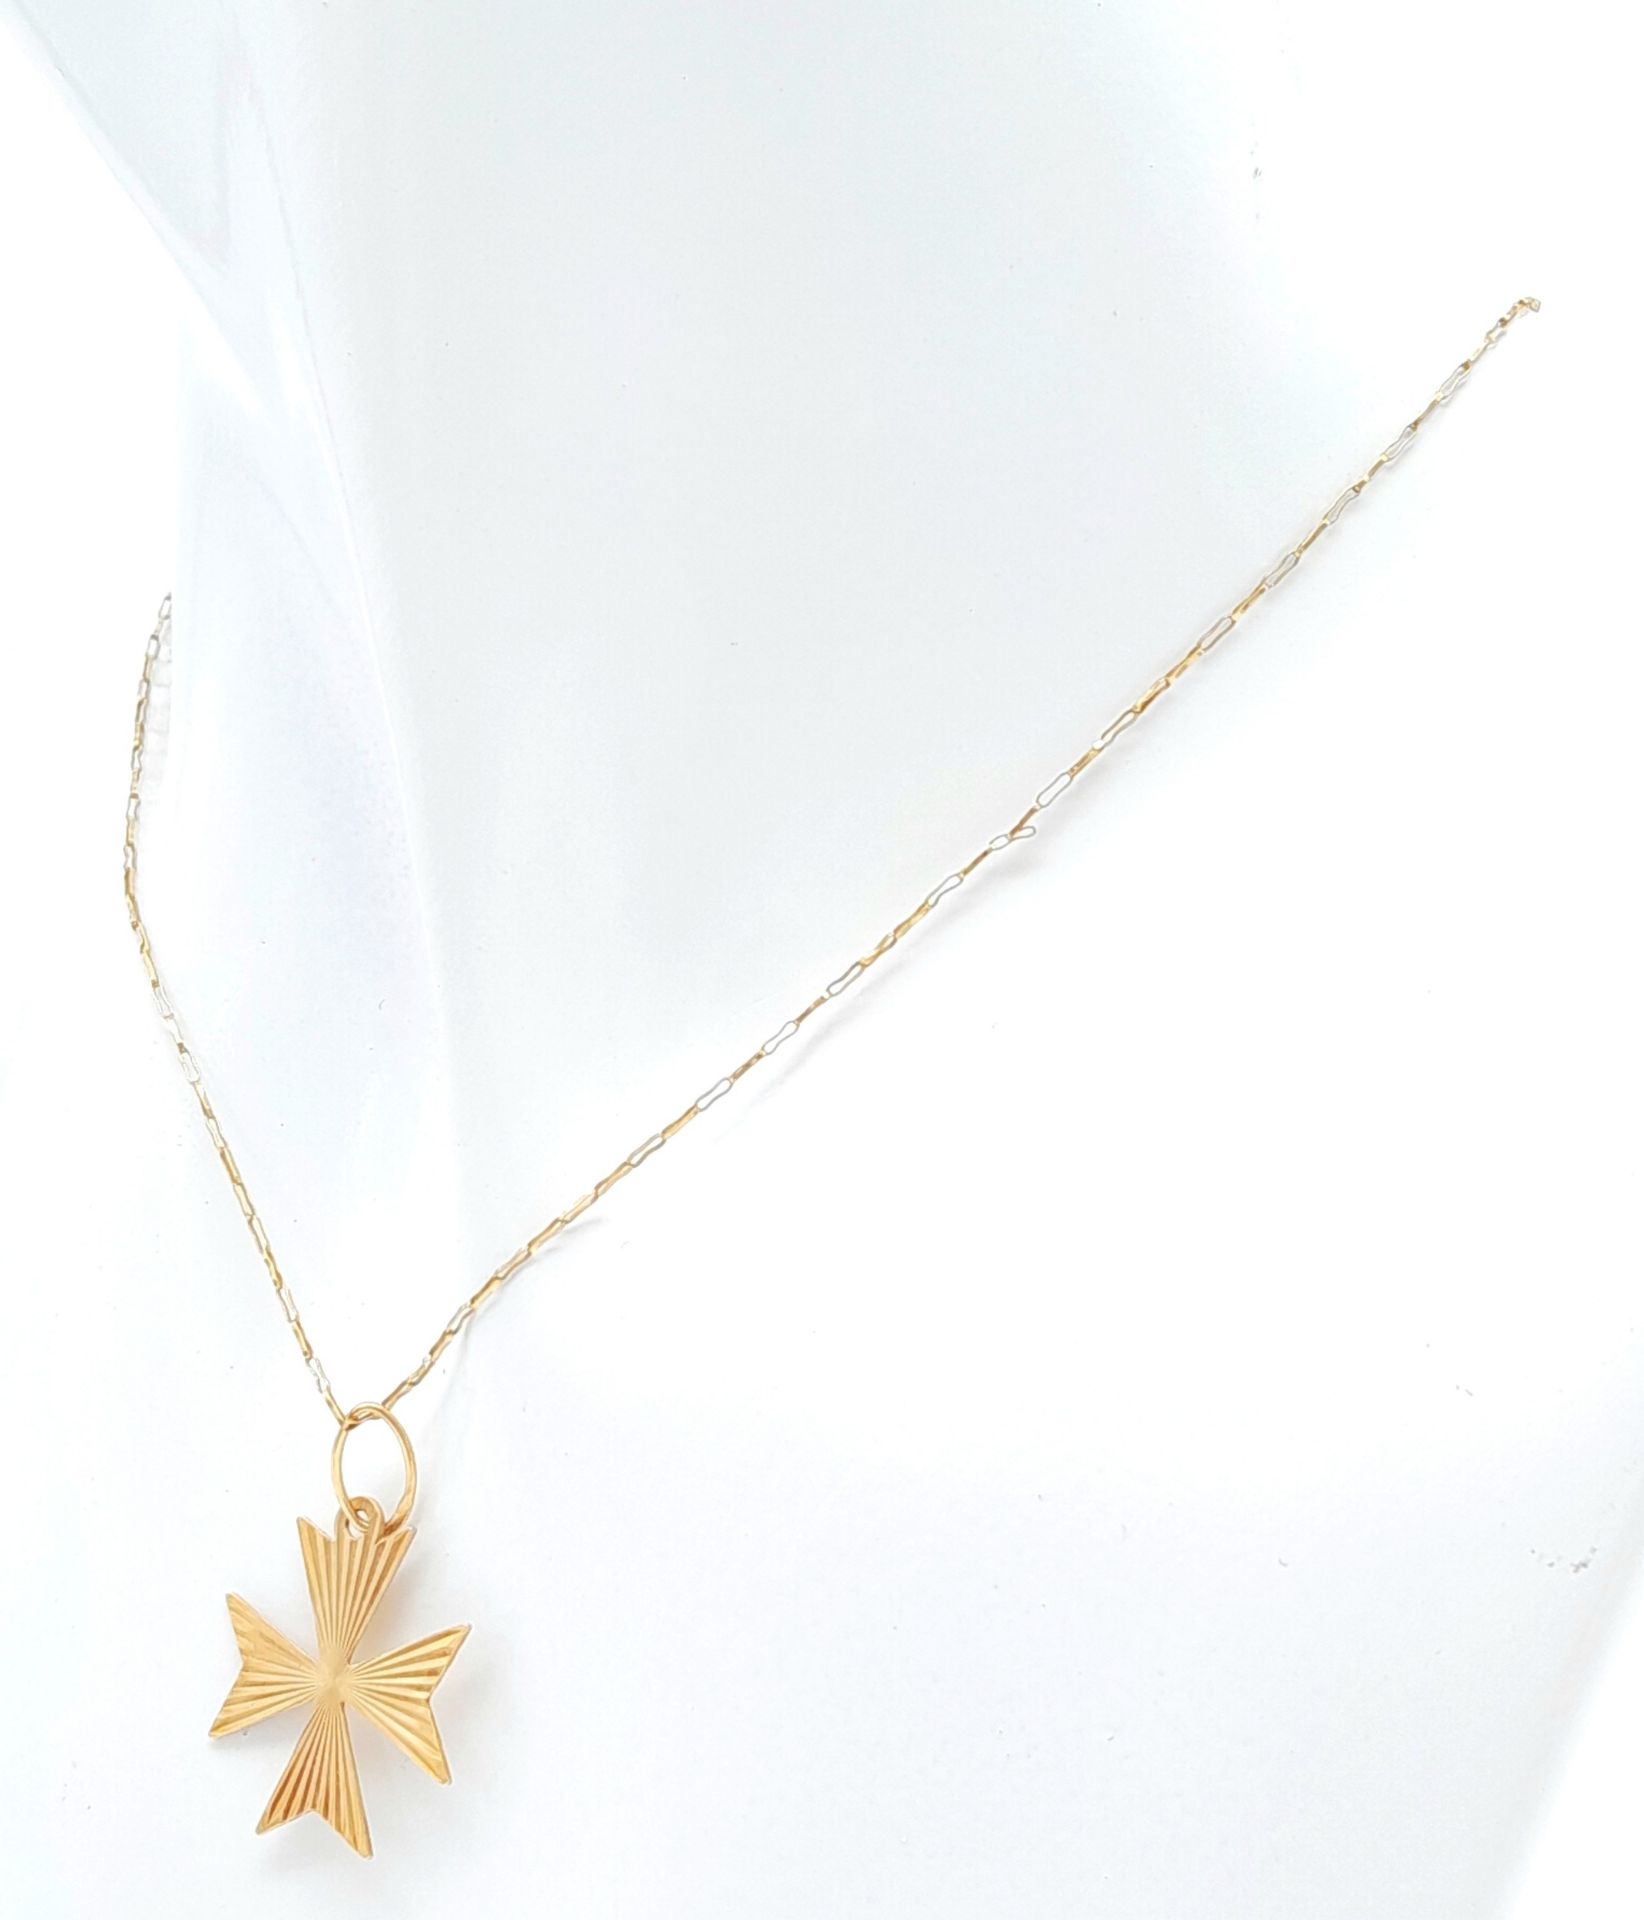 9 K yellow gold chain necklace with a Maltese cross pendant (12 x 12 mm), chain length: 51 cm, total - Image 2 of 5